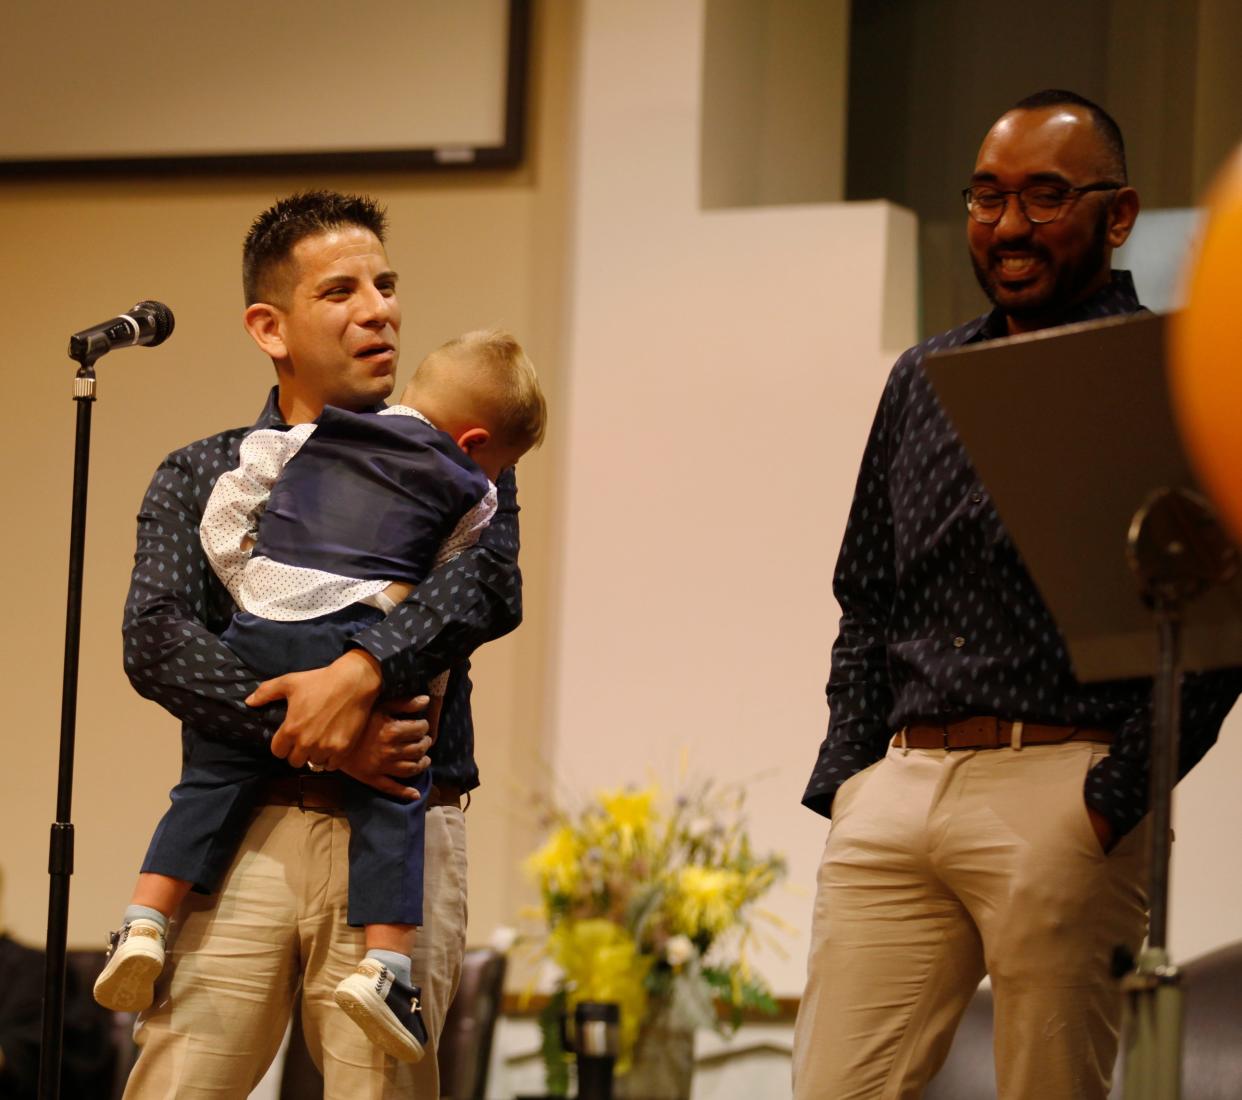 Isaiah and Joaquin Casados testify during their final adoption hearing on Nov. 18 for their son at Lubbock Impact as part of National Adoption Day.